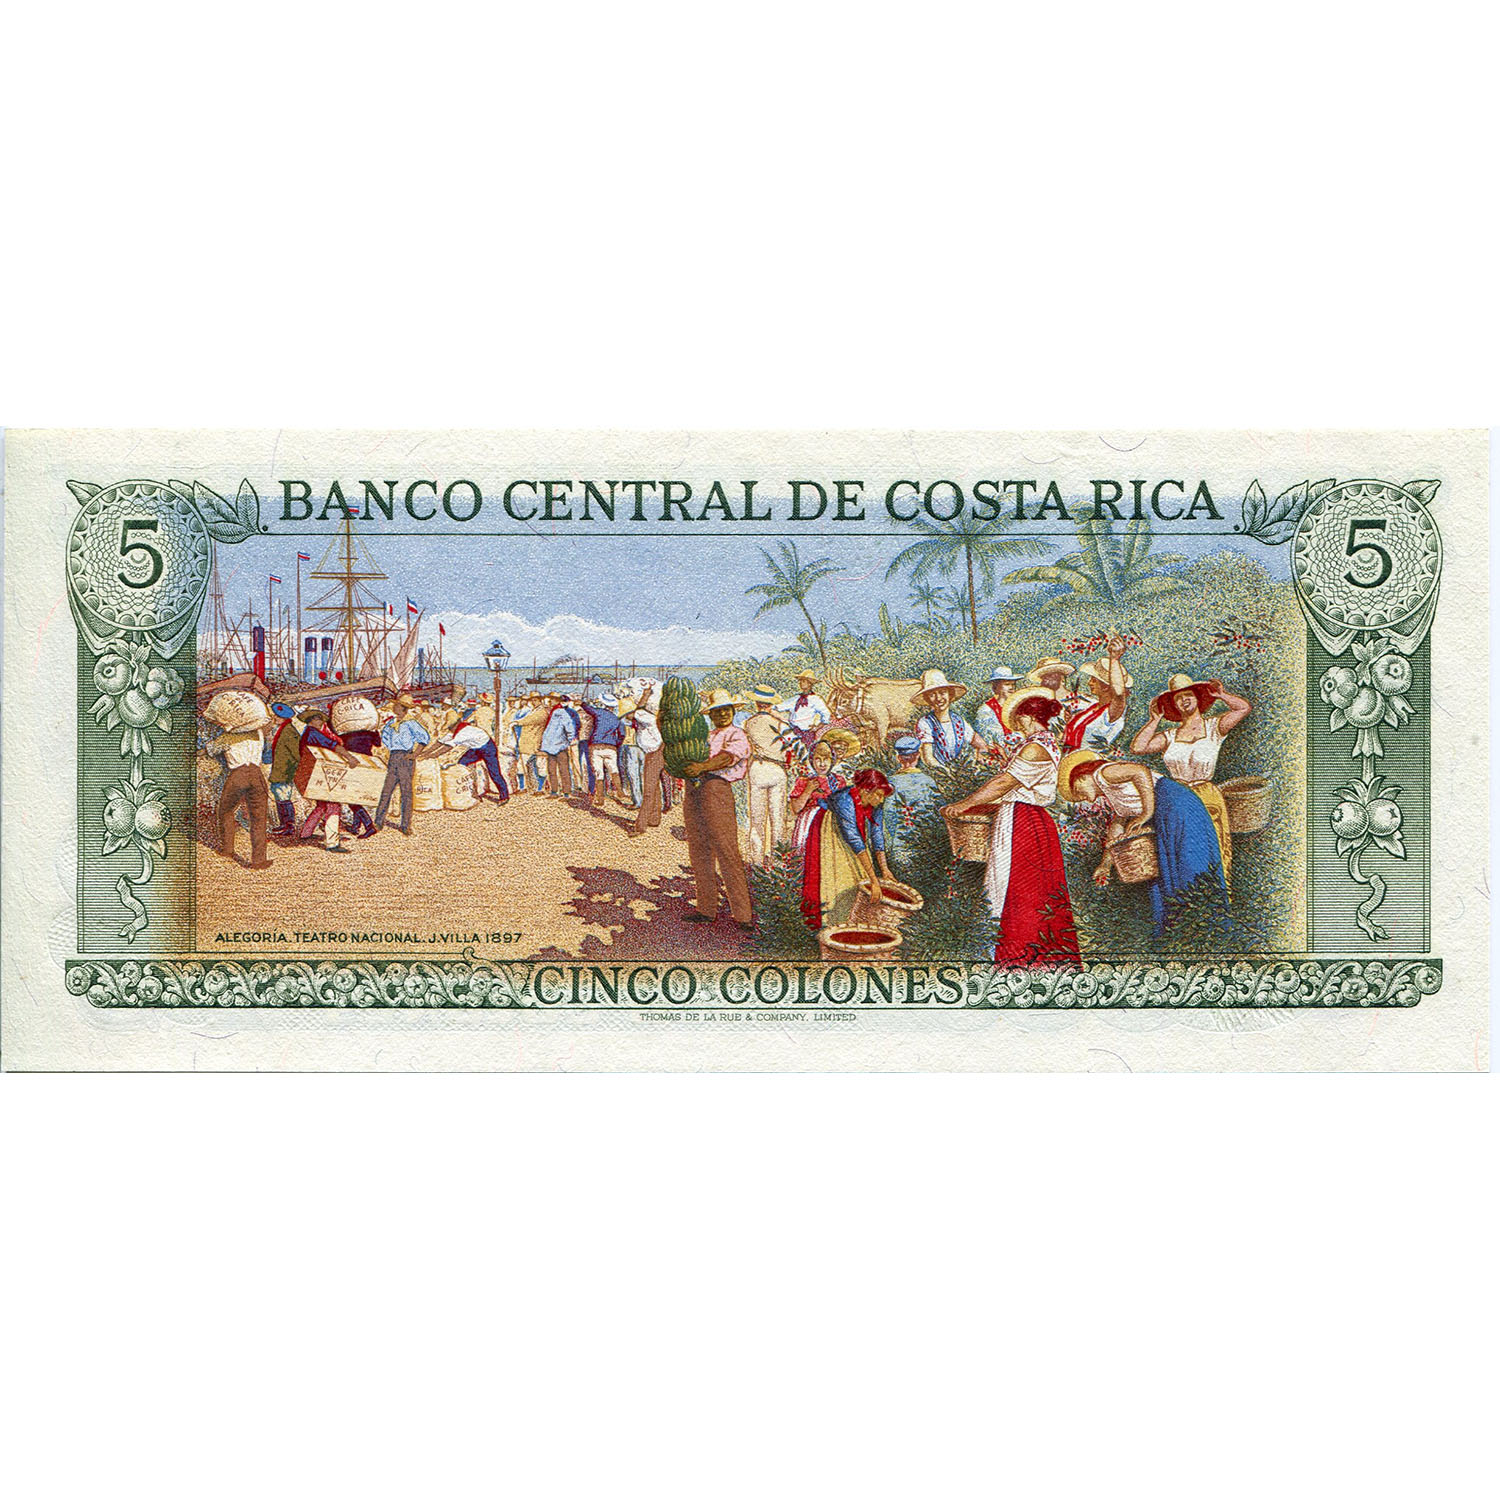 Currency From South America & Central America